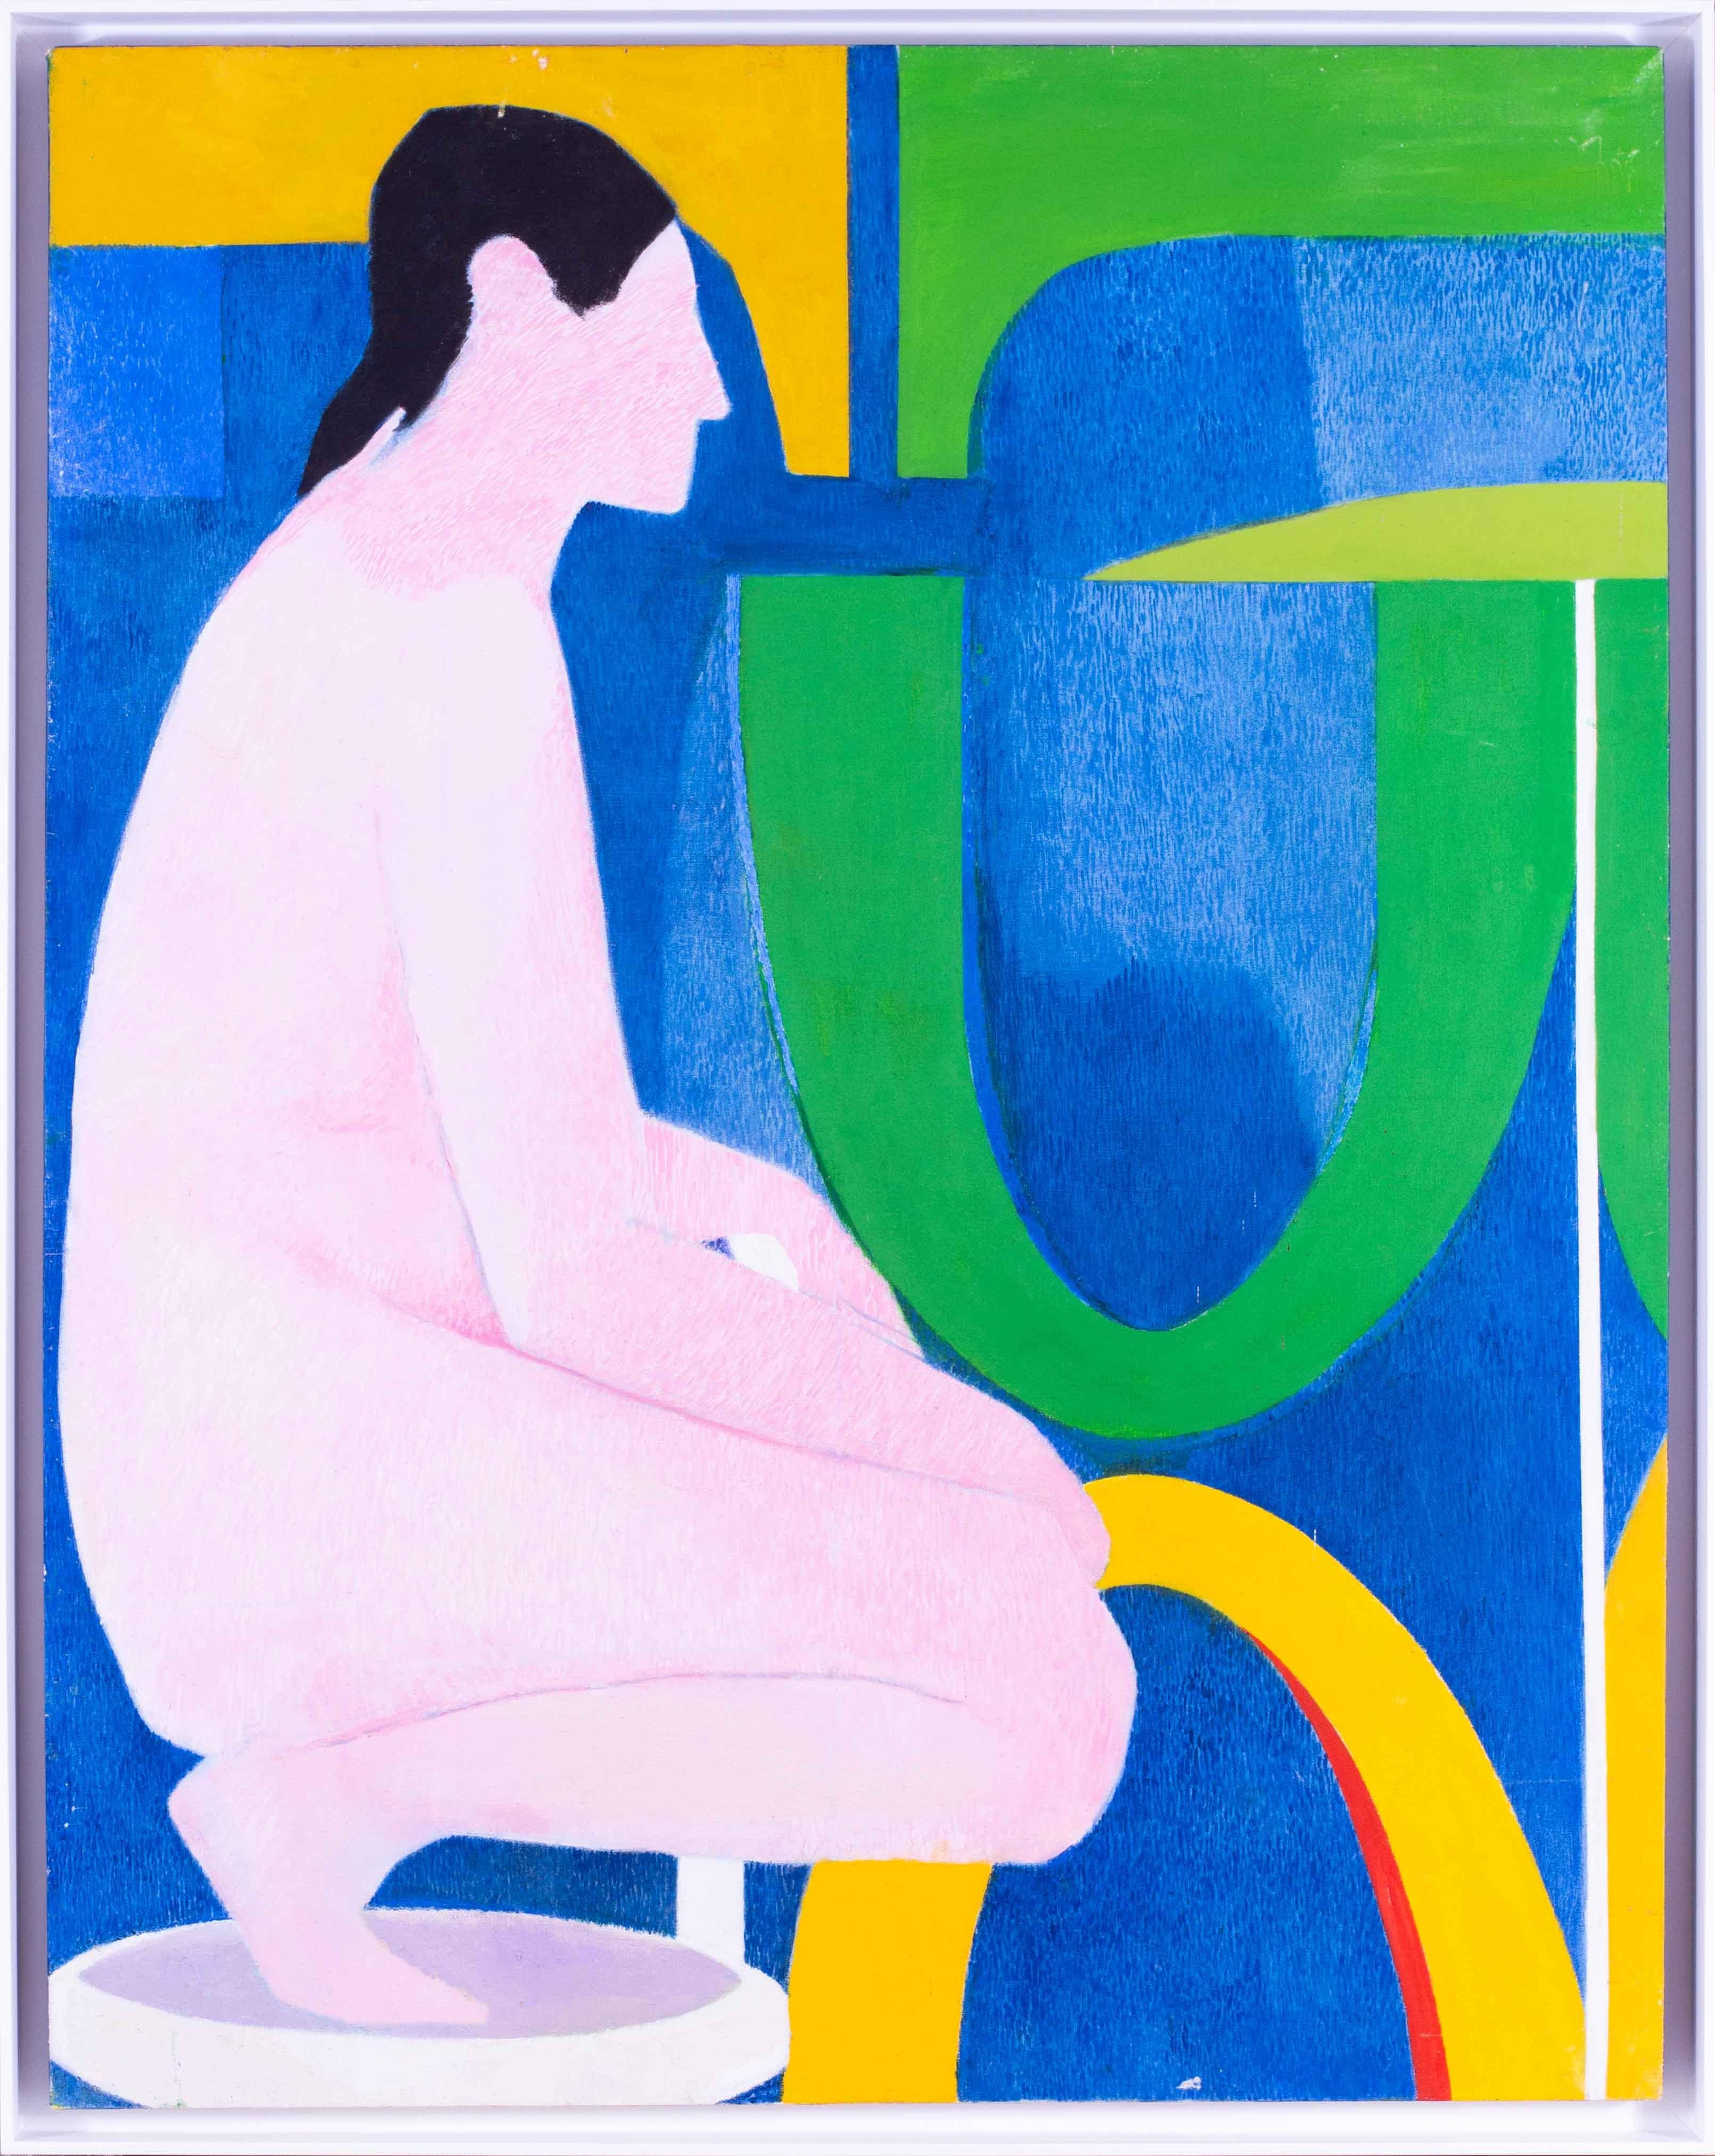 A very eye-catching and expansive Pop Art painting of a male nude set against a painted graphic design from 1976 by British born artist Ewart Johns.  The strong blue, green and yellow background skillfully enhances the simplistic execution of the